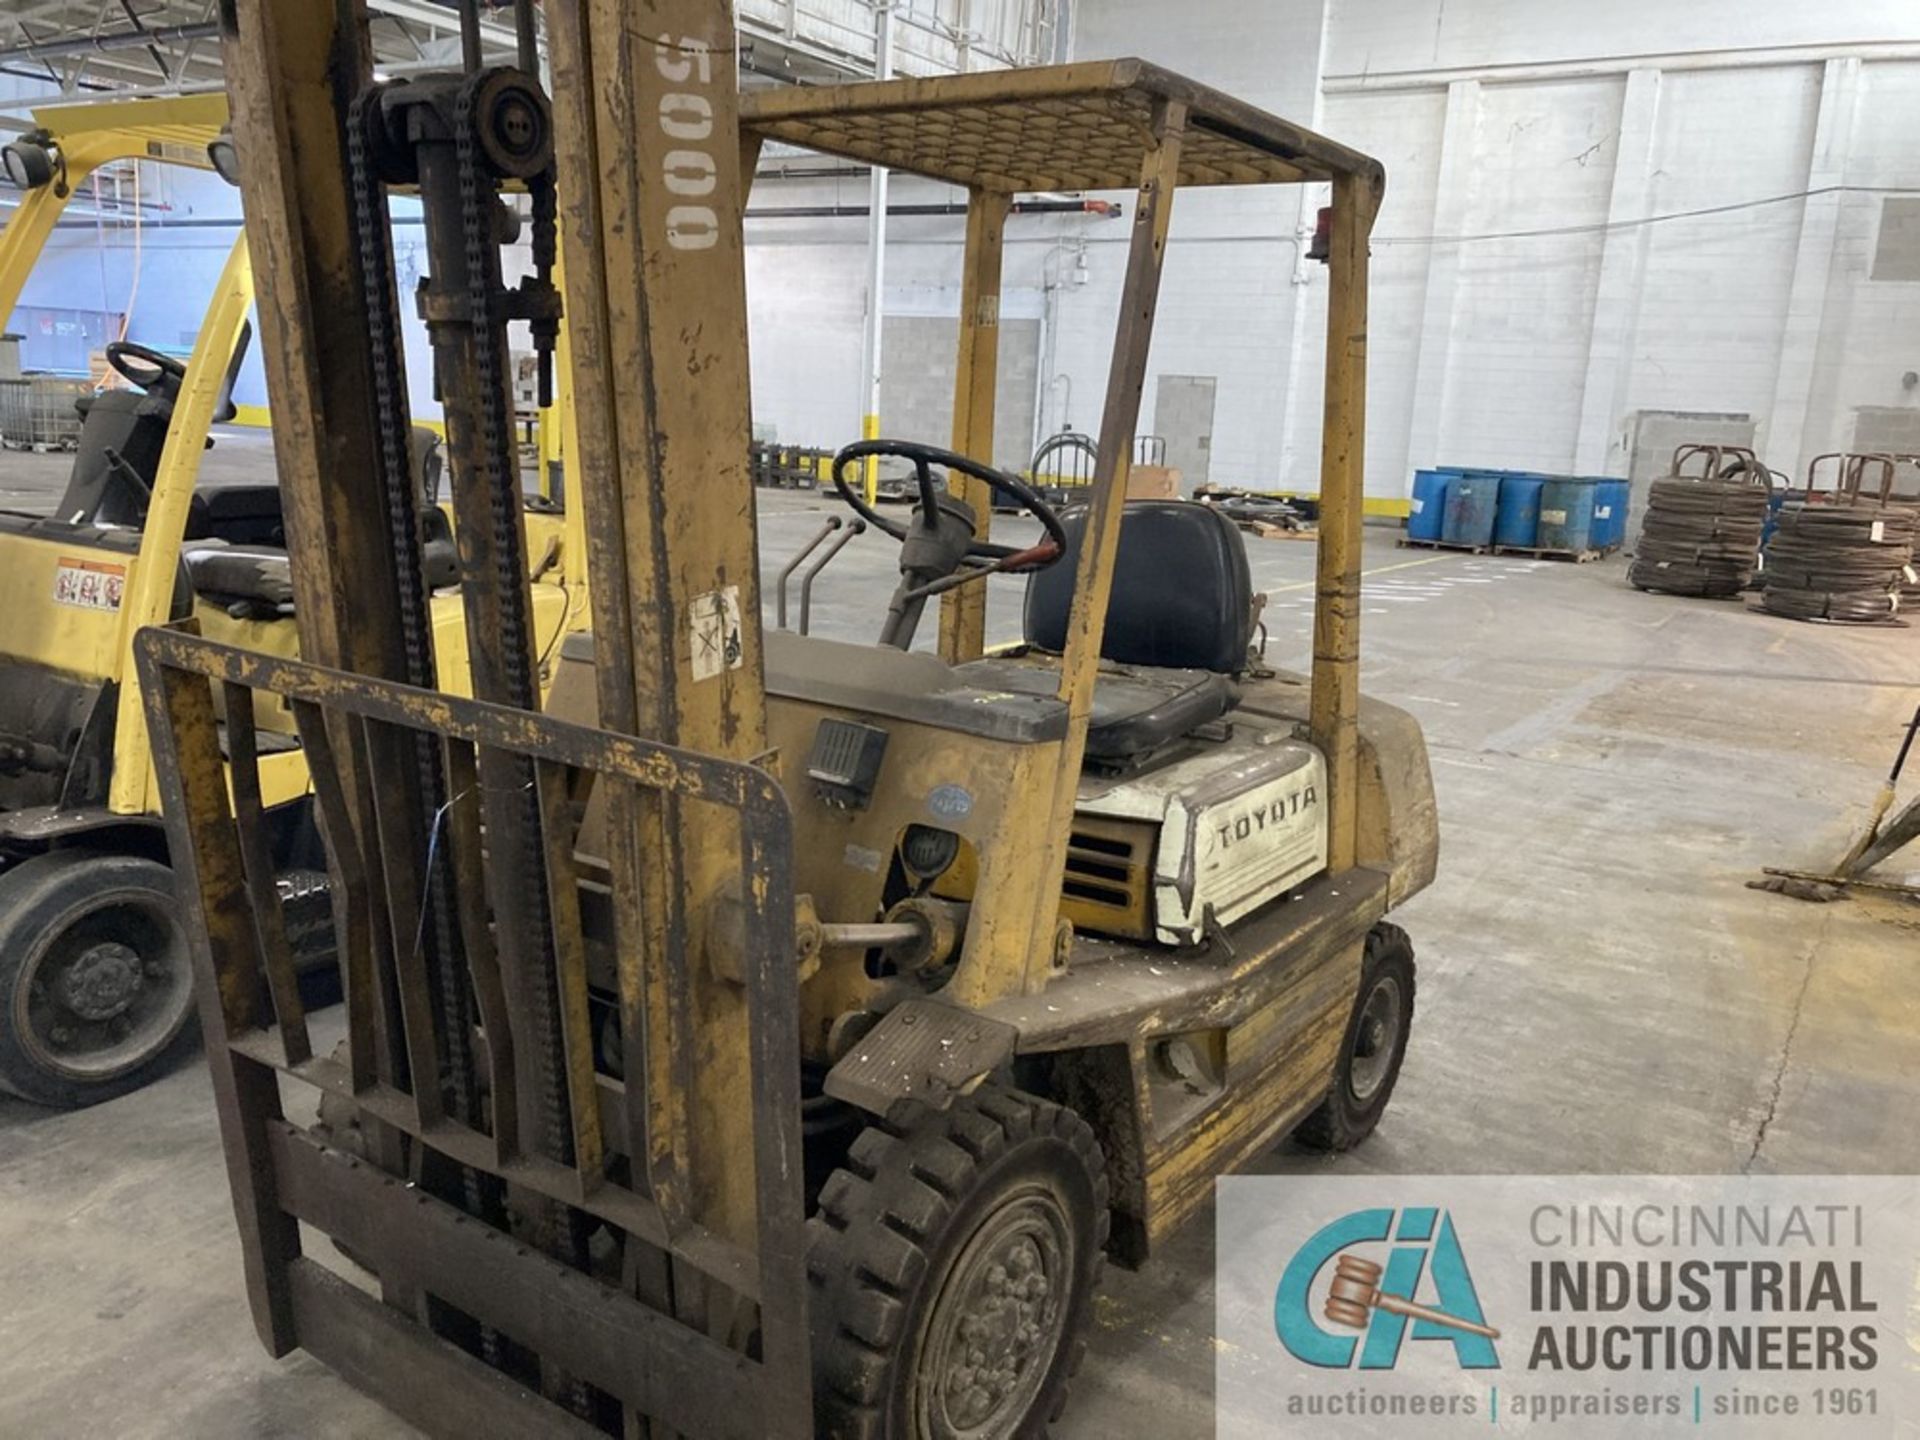 5,000 LB. TOYOTA LP GAS LIFT TRUCK - NOT RUNNING, ISSUES UNKNOWN, NO FORKS, PARTS MISSING